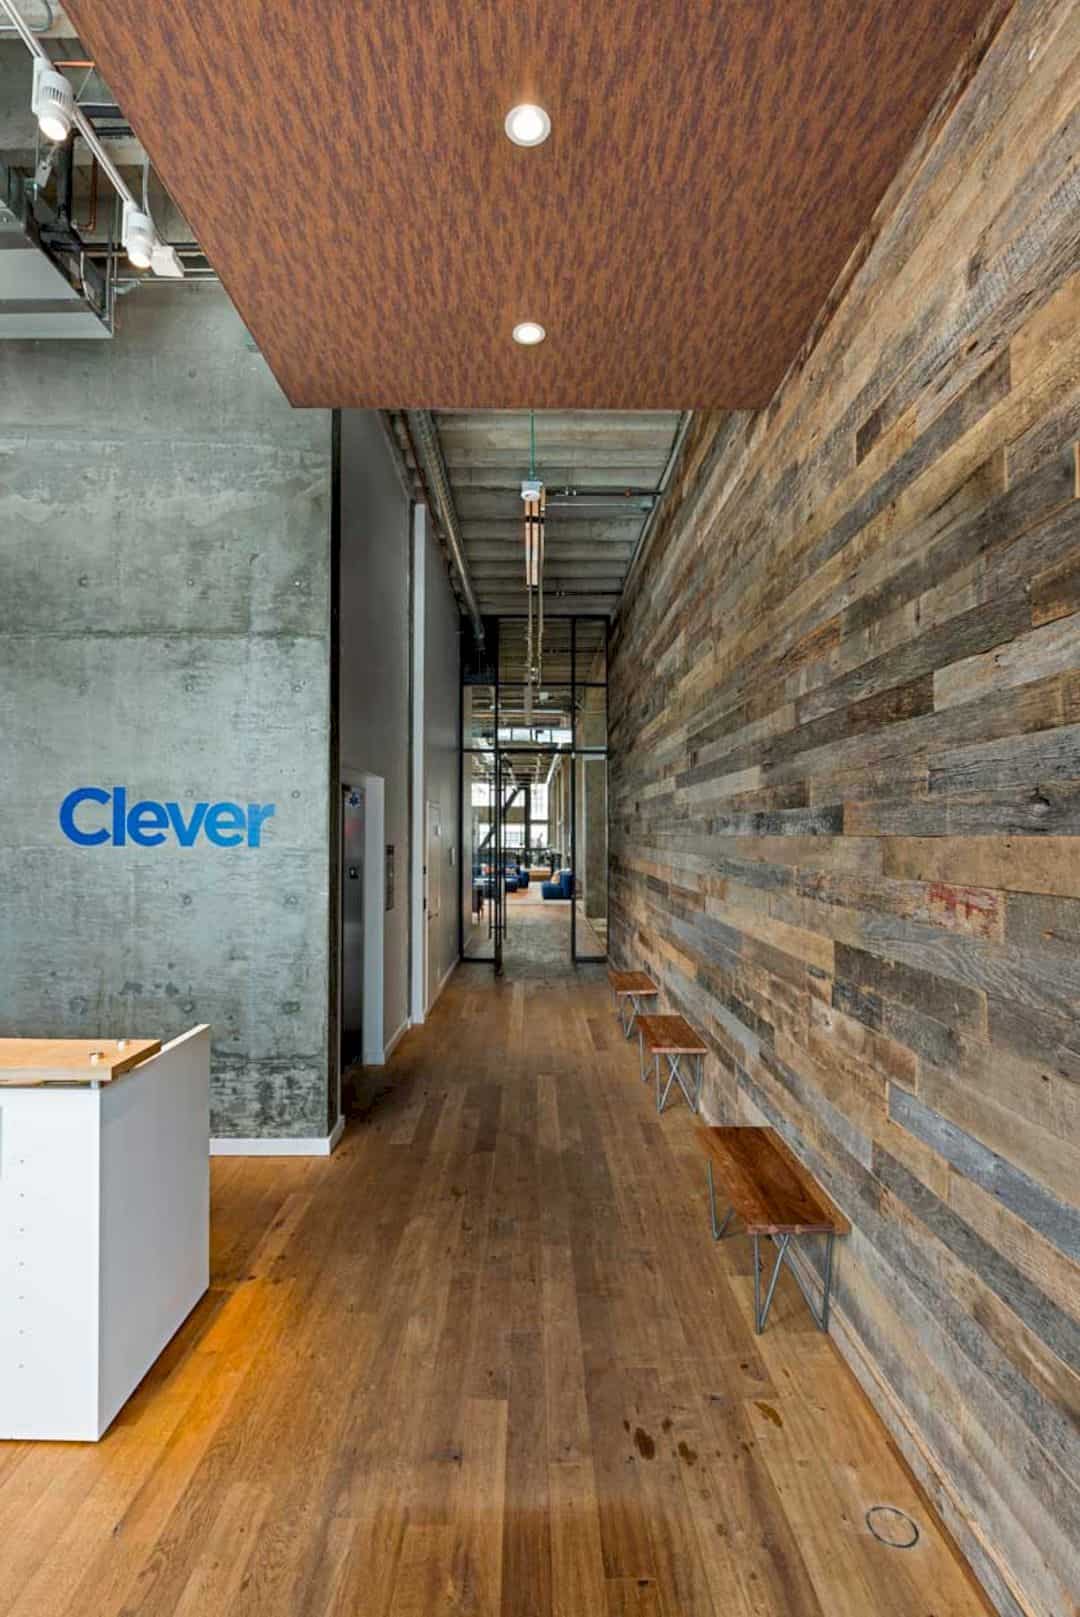 Clever Headquarters 7